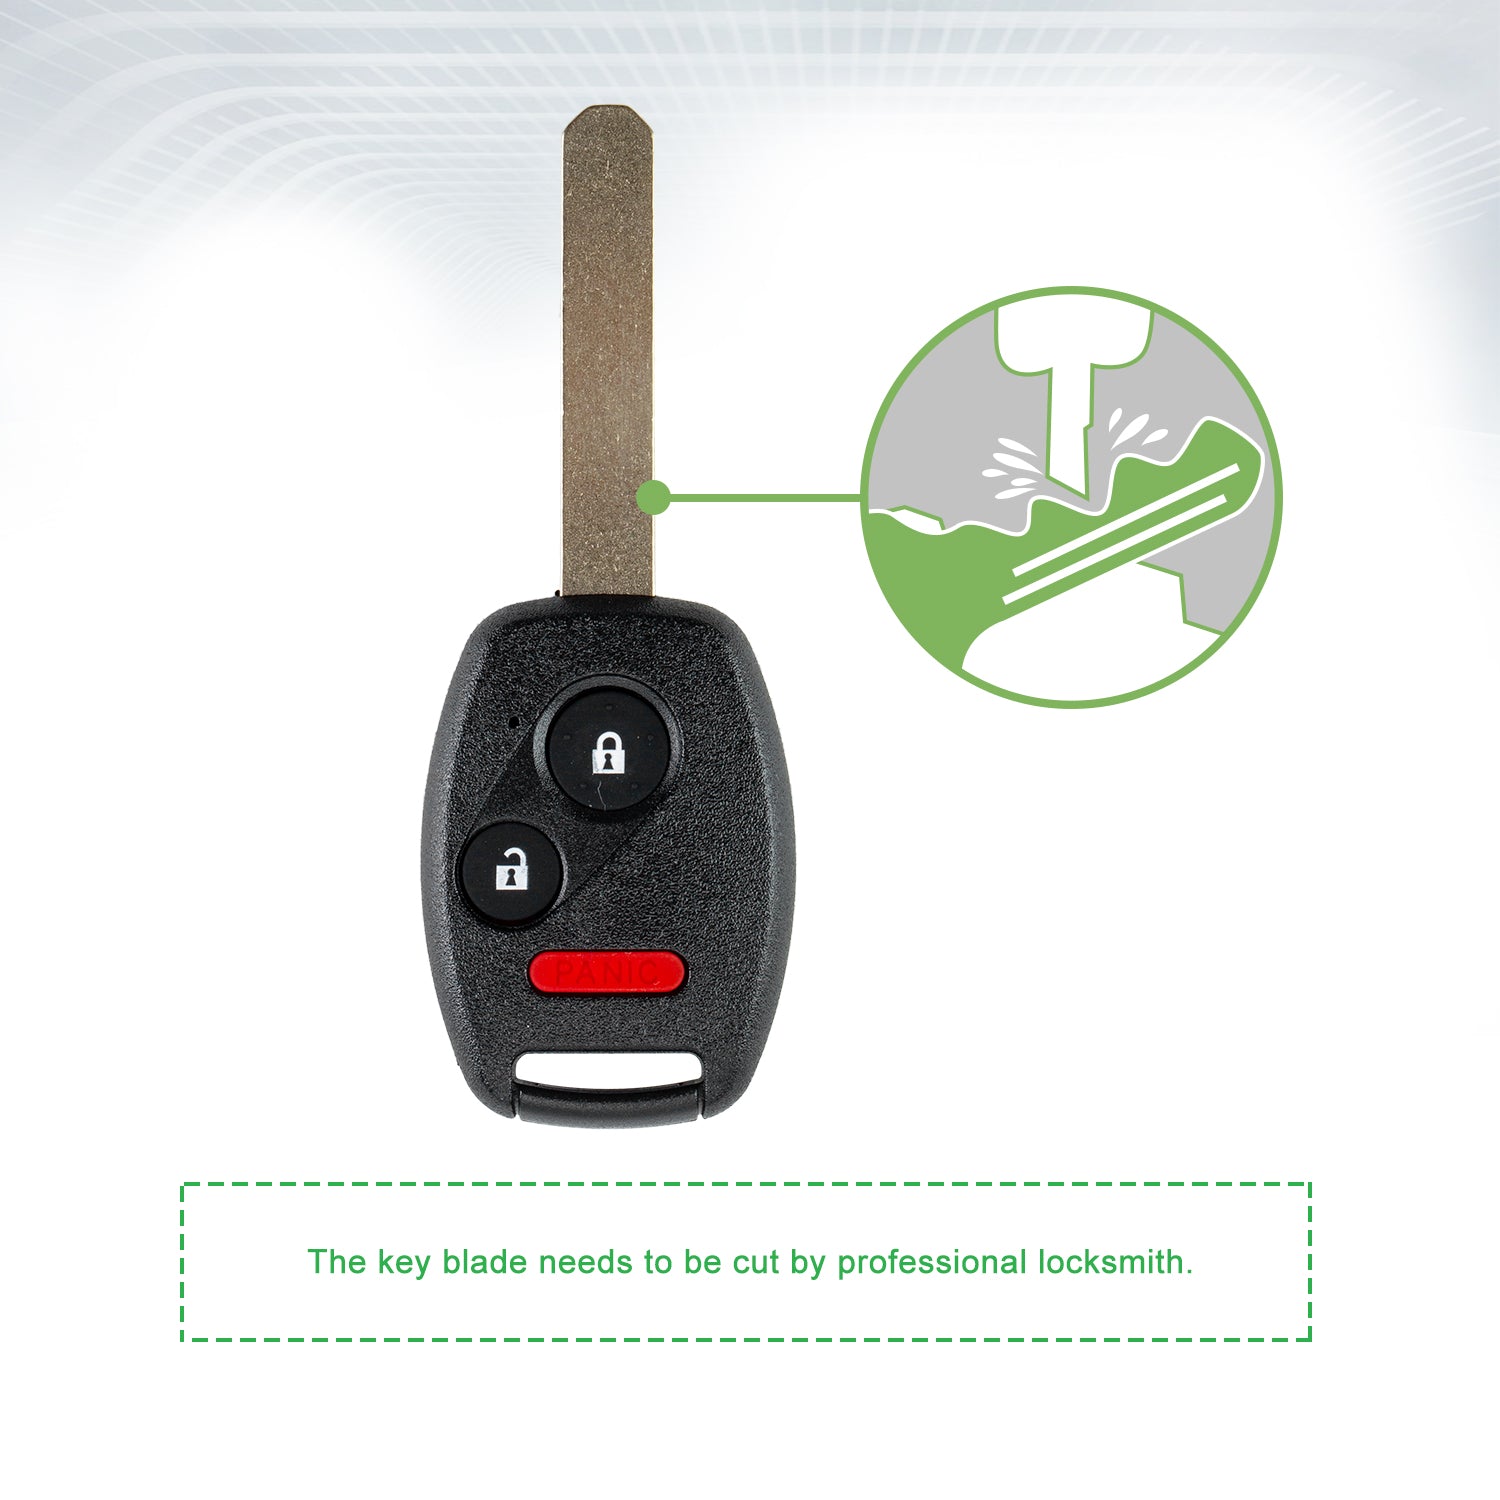 Lots of 5 Keyless Remote Car Key Fob Replacement for 2009 2010 2011 2012 2013 Honda FIT CR-V 3 Button MLBHLIK-1T